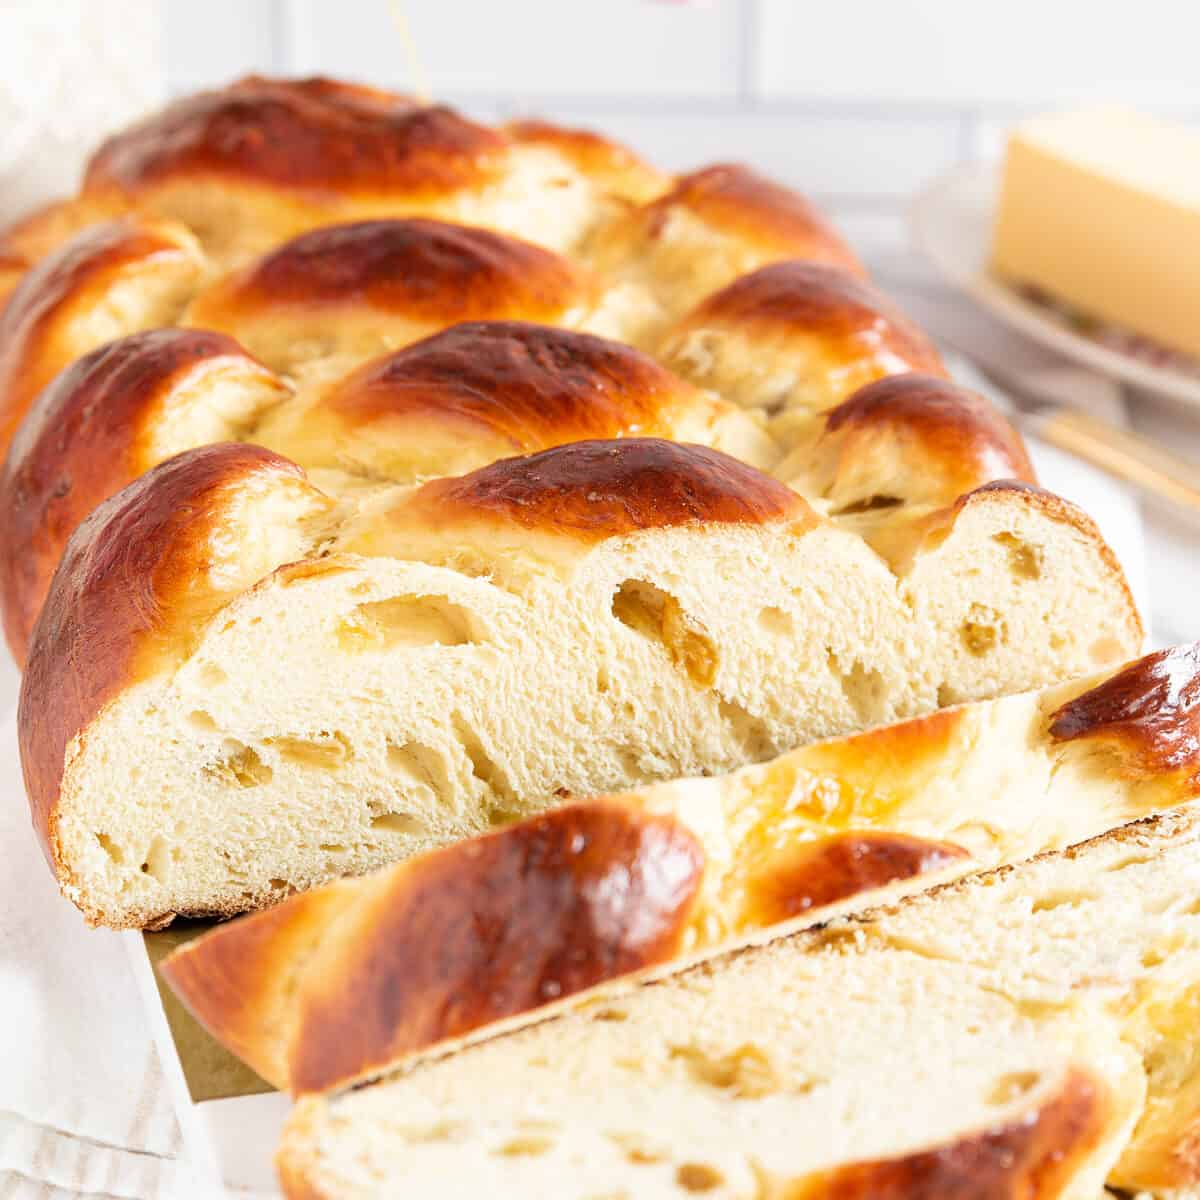 Have this sweet braided bread with a little butter spread and a hot cup of tea or coffee, as we do in our household. The bread itself is soft, moist, and sweet.